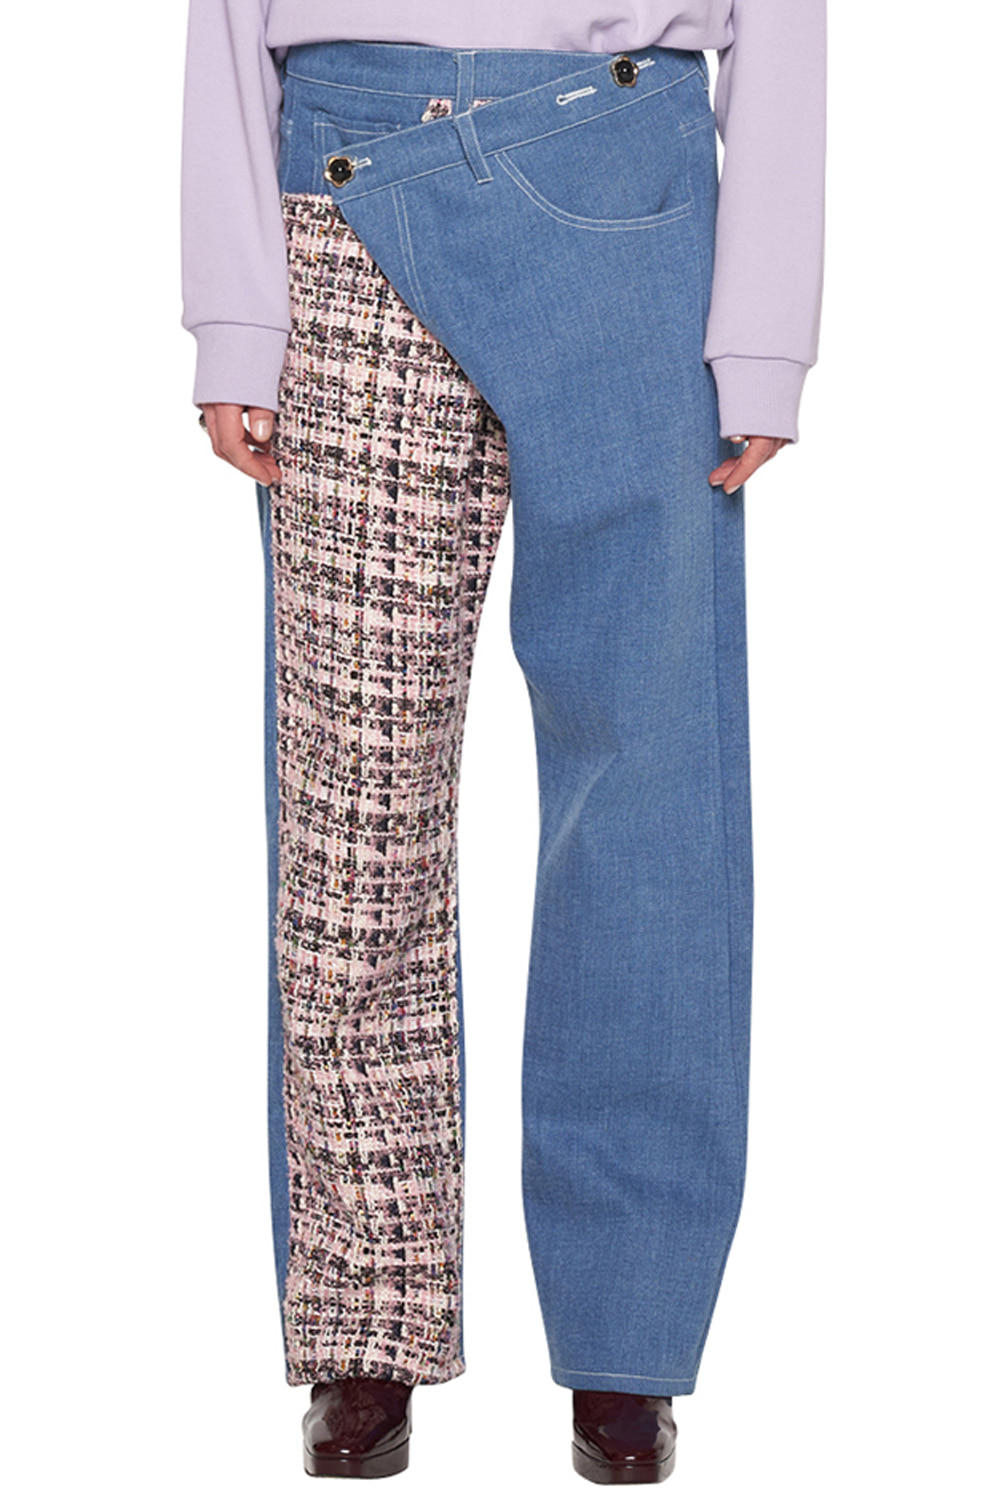 PINK TWEED PATCHED JEANS